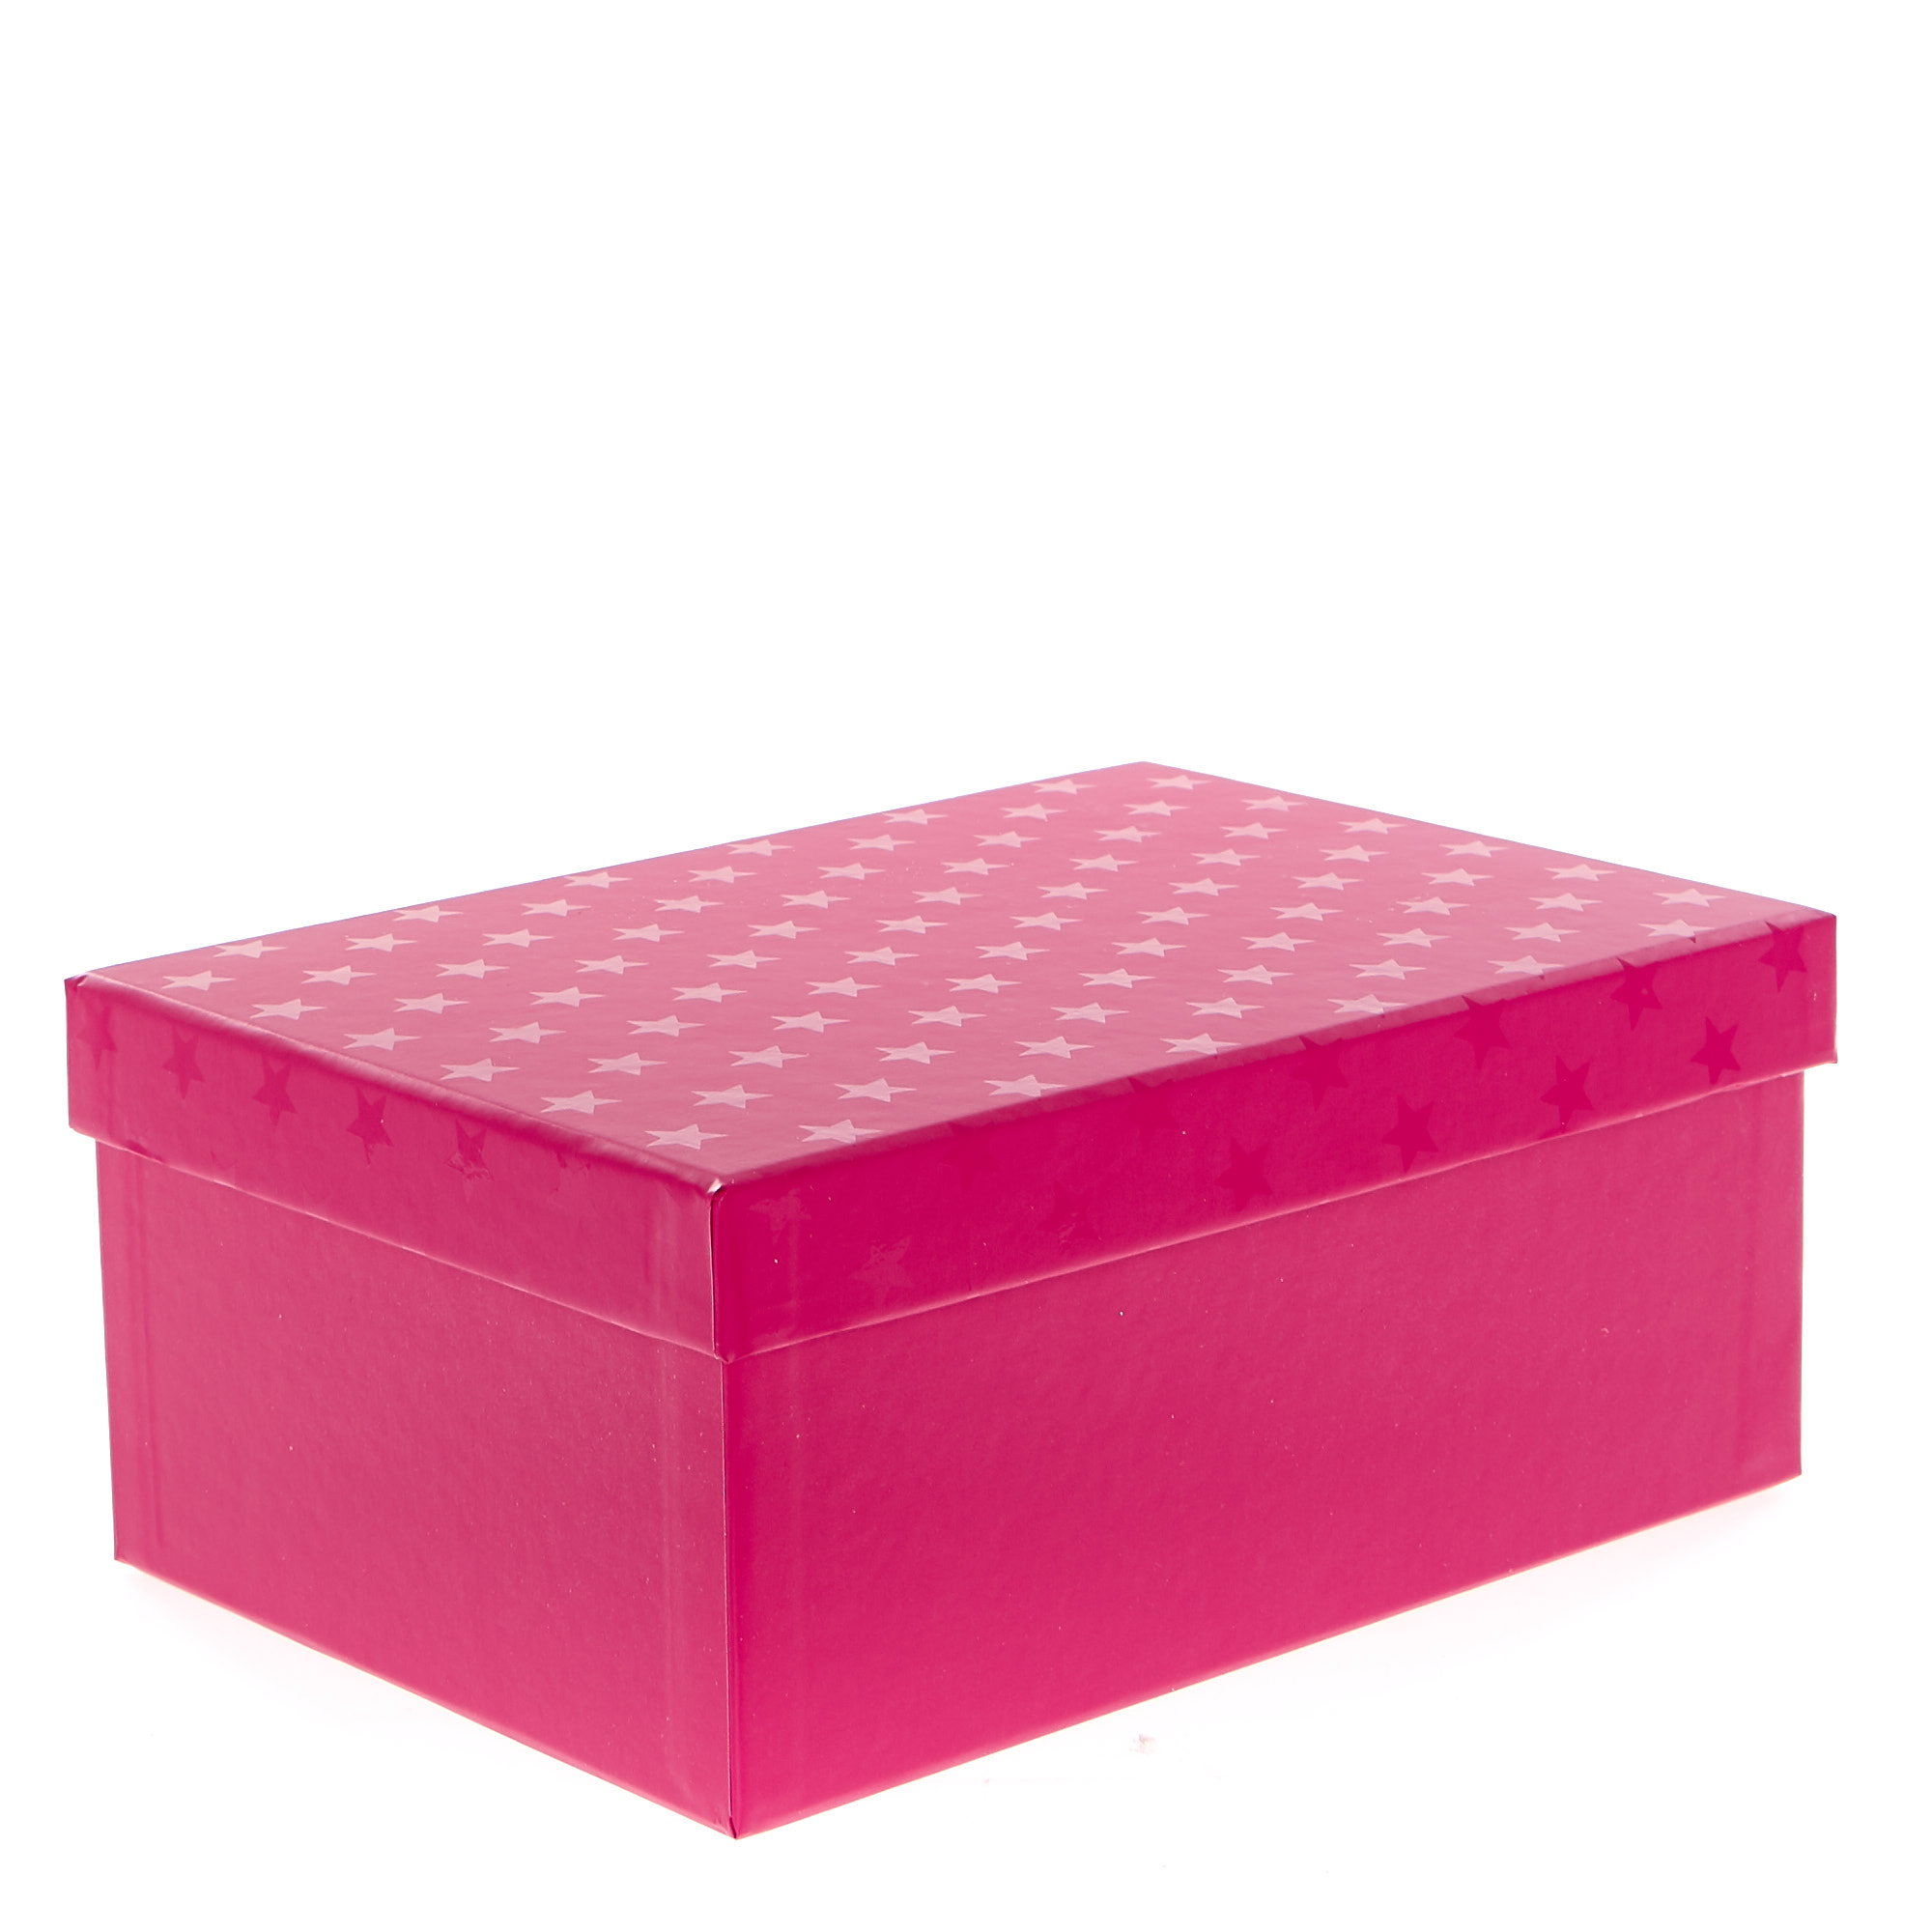 Pink Starry Gift Boxes - Set of 3